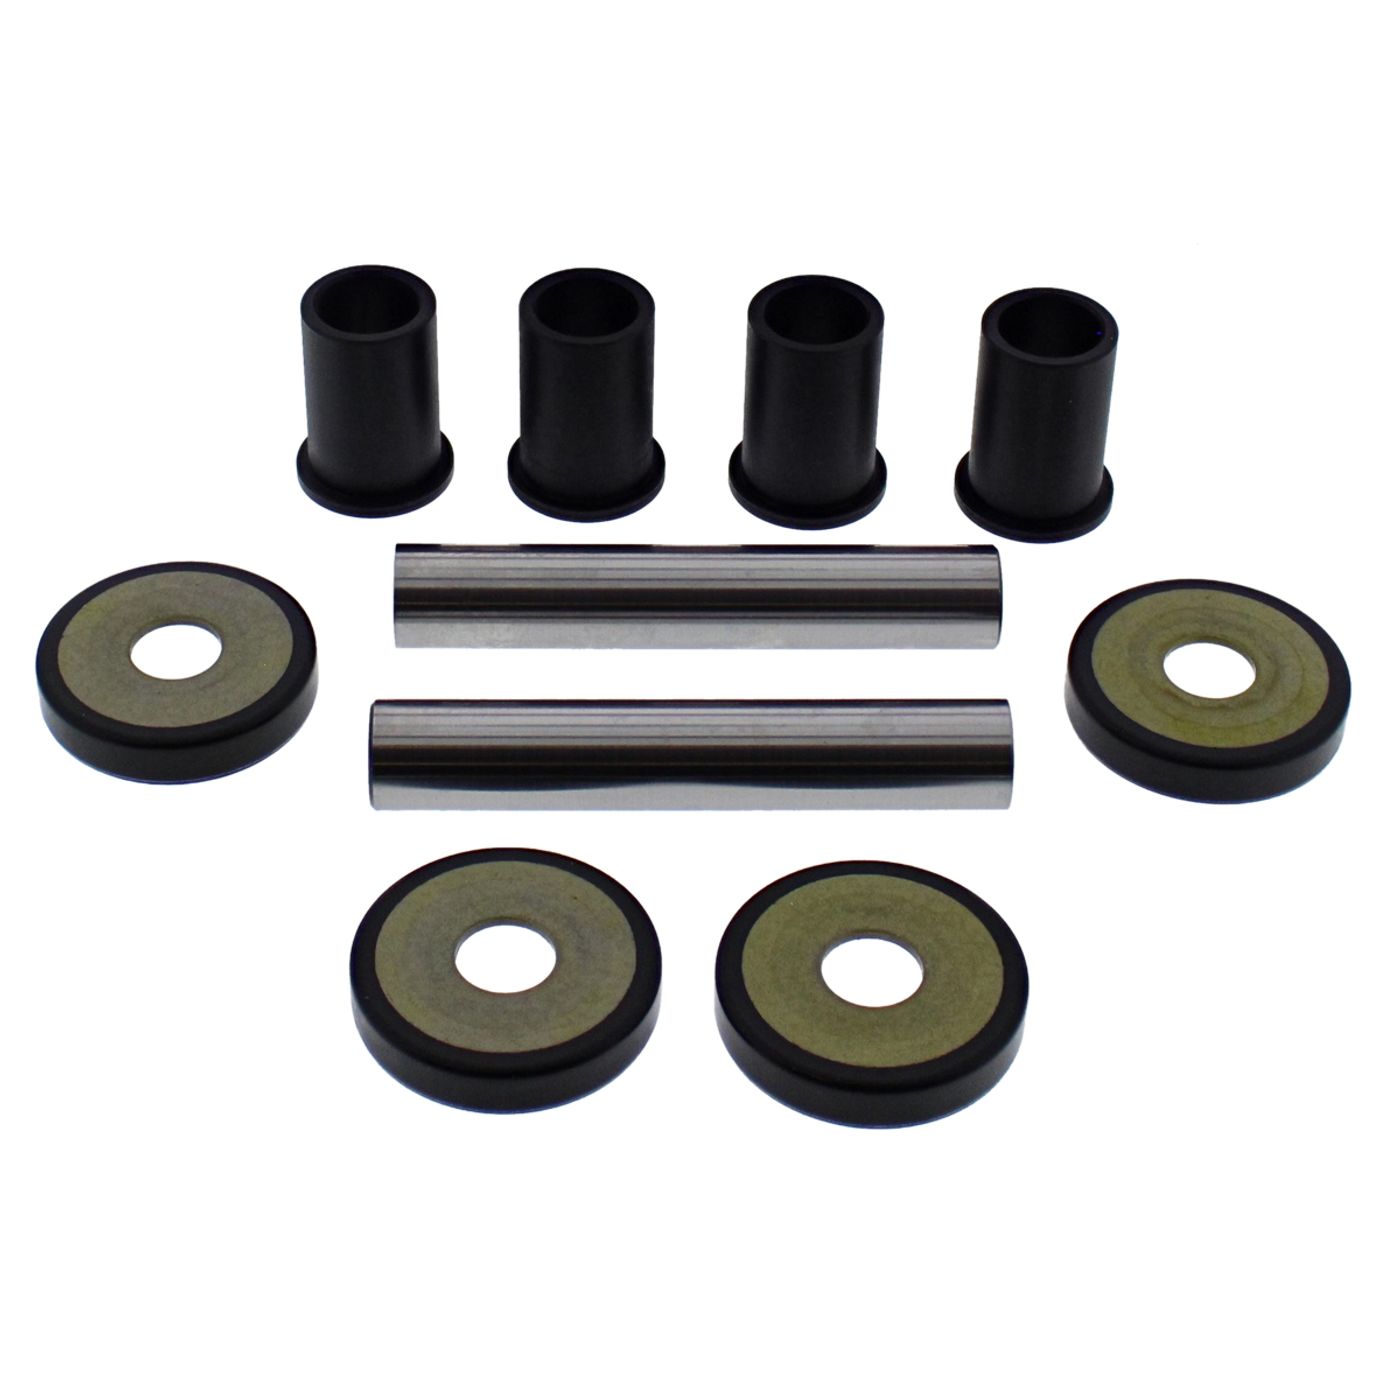 Wrp Rear Ind. Suspension Kits - WRP501229 image